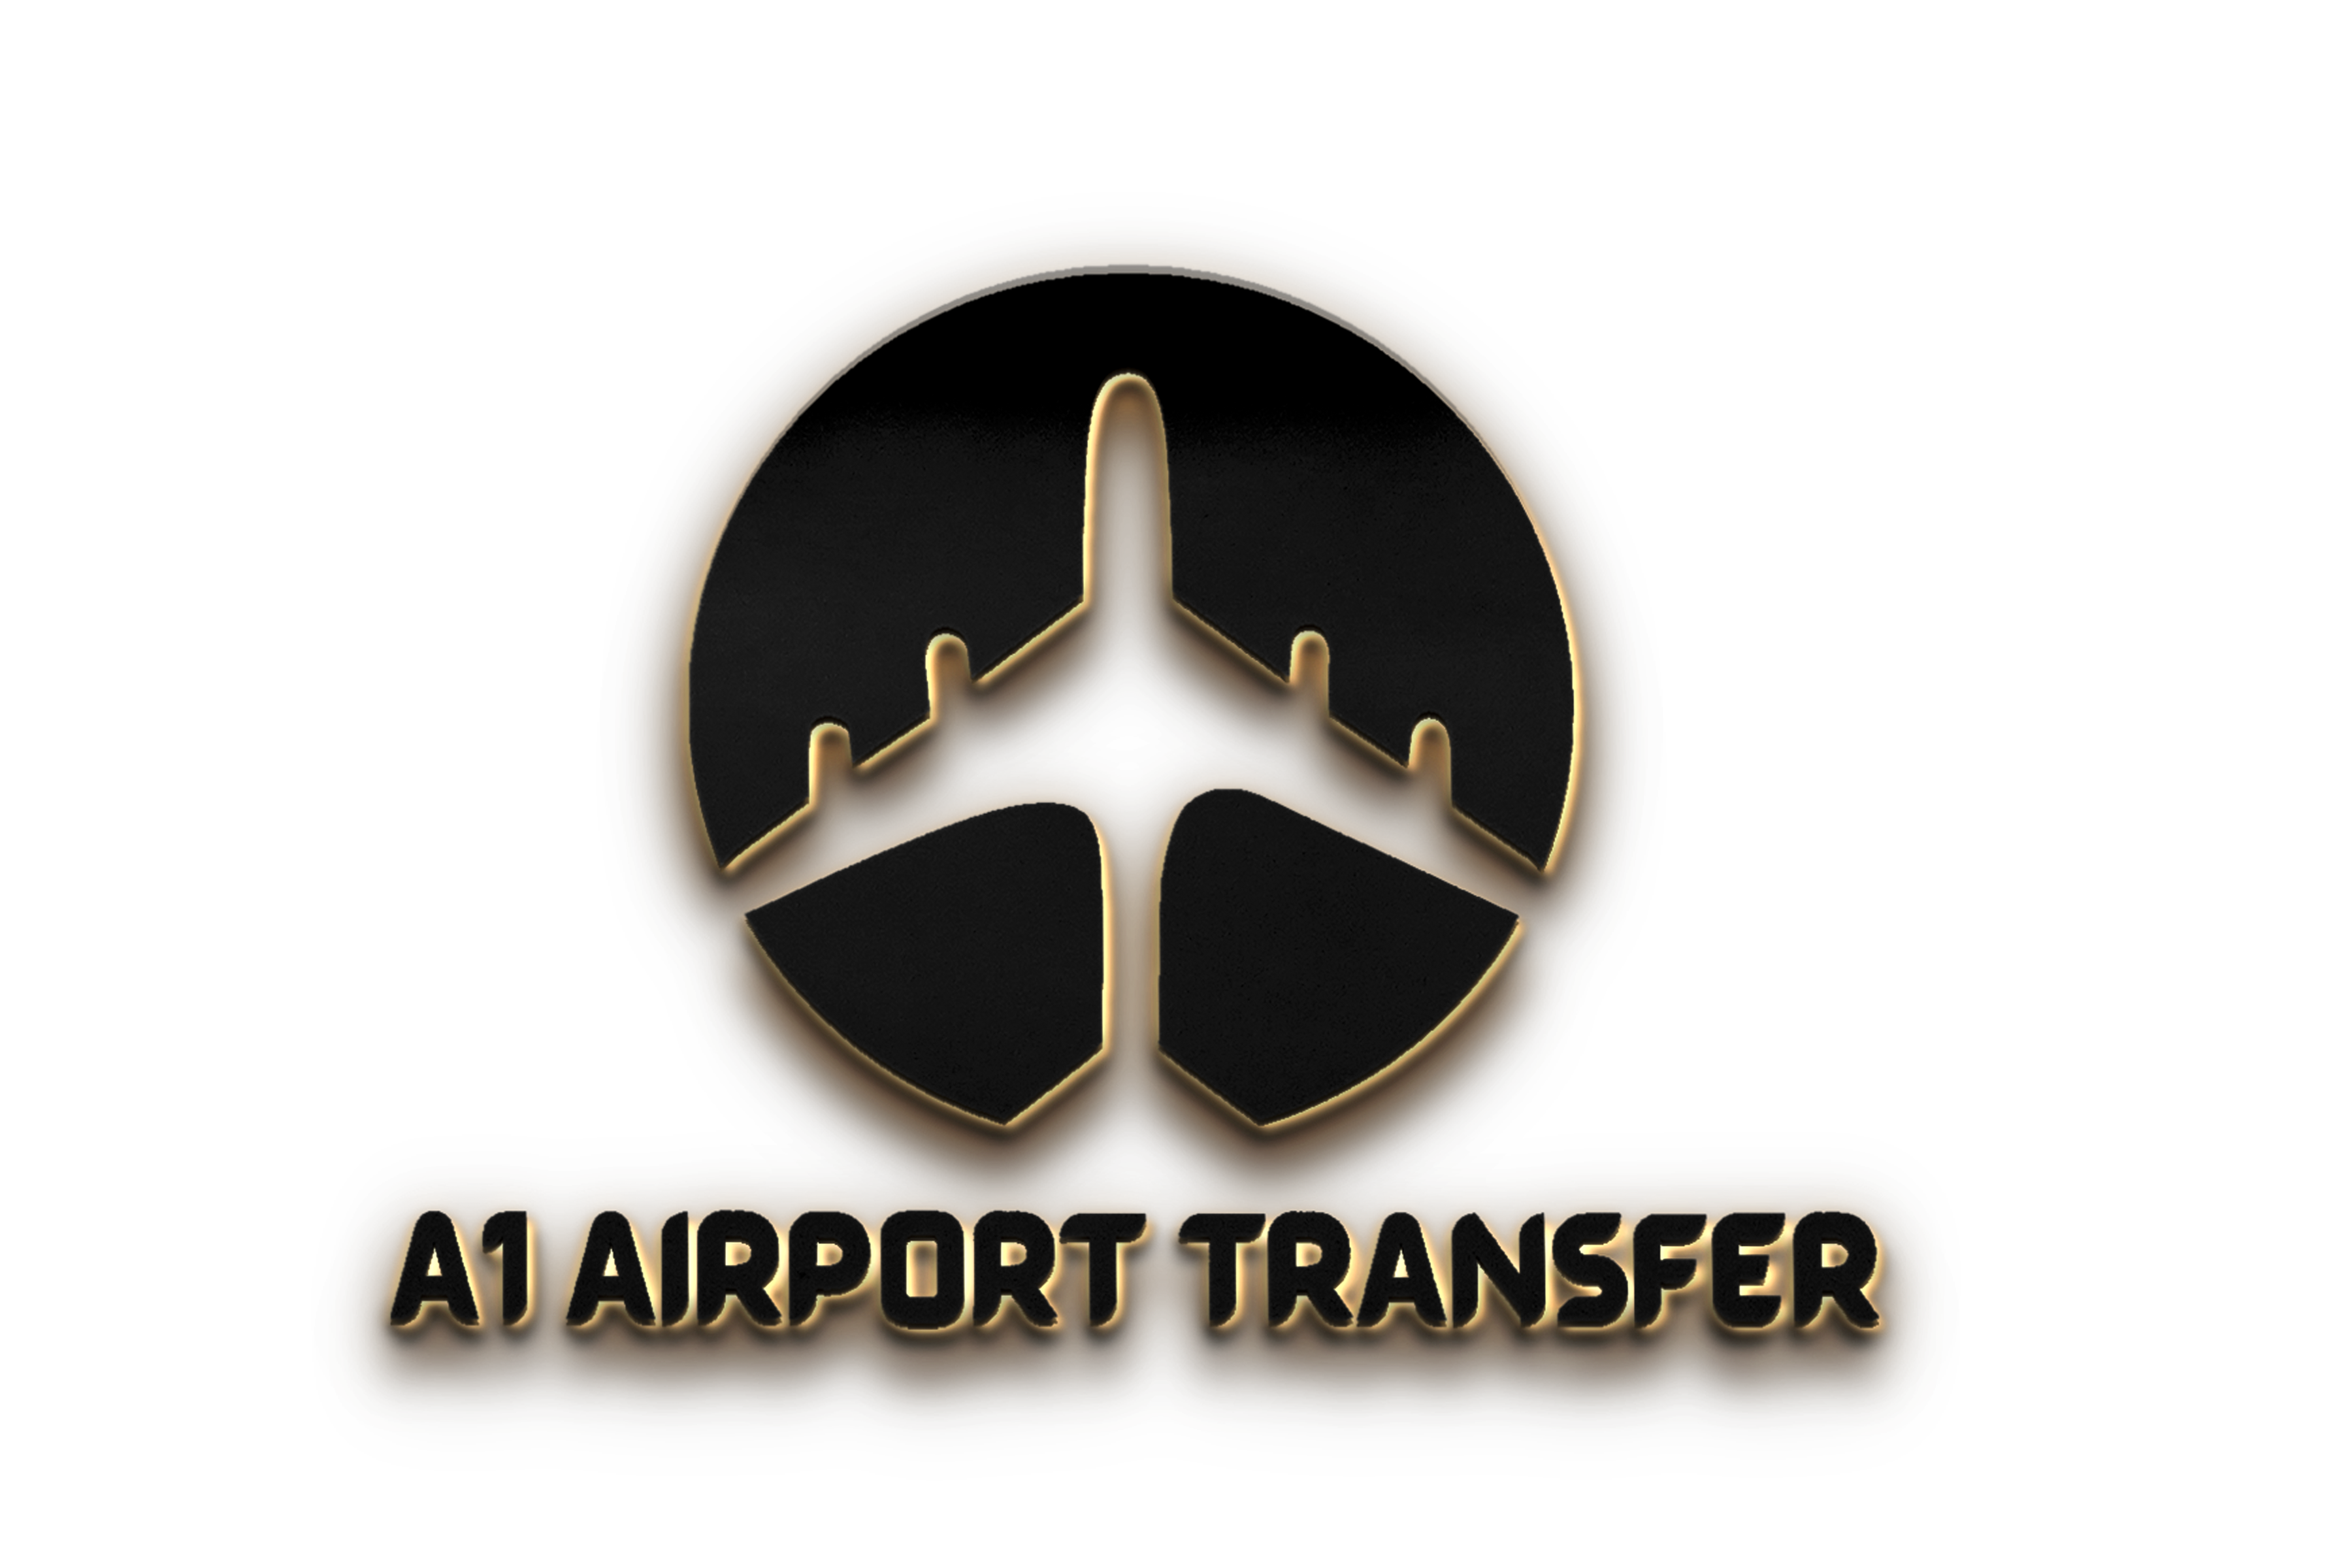 Airport Transfer Cab Hire Service - A1 Airport Transfers